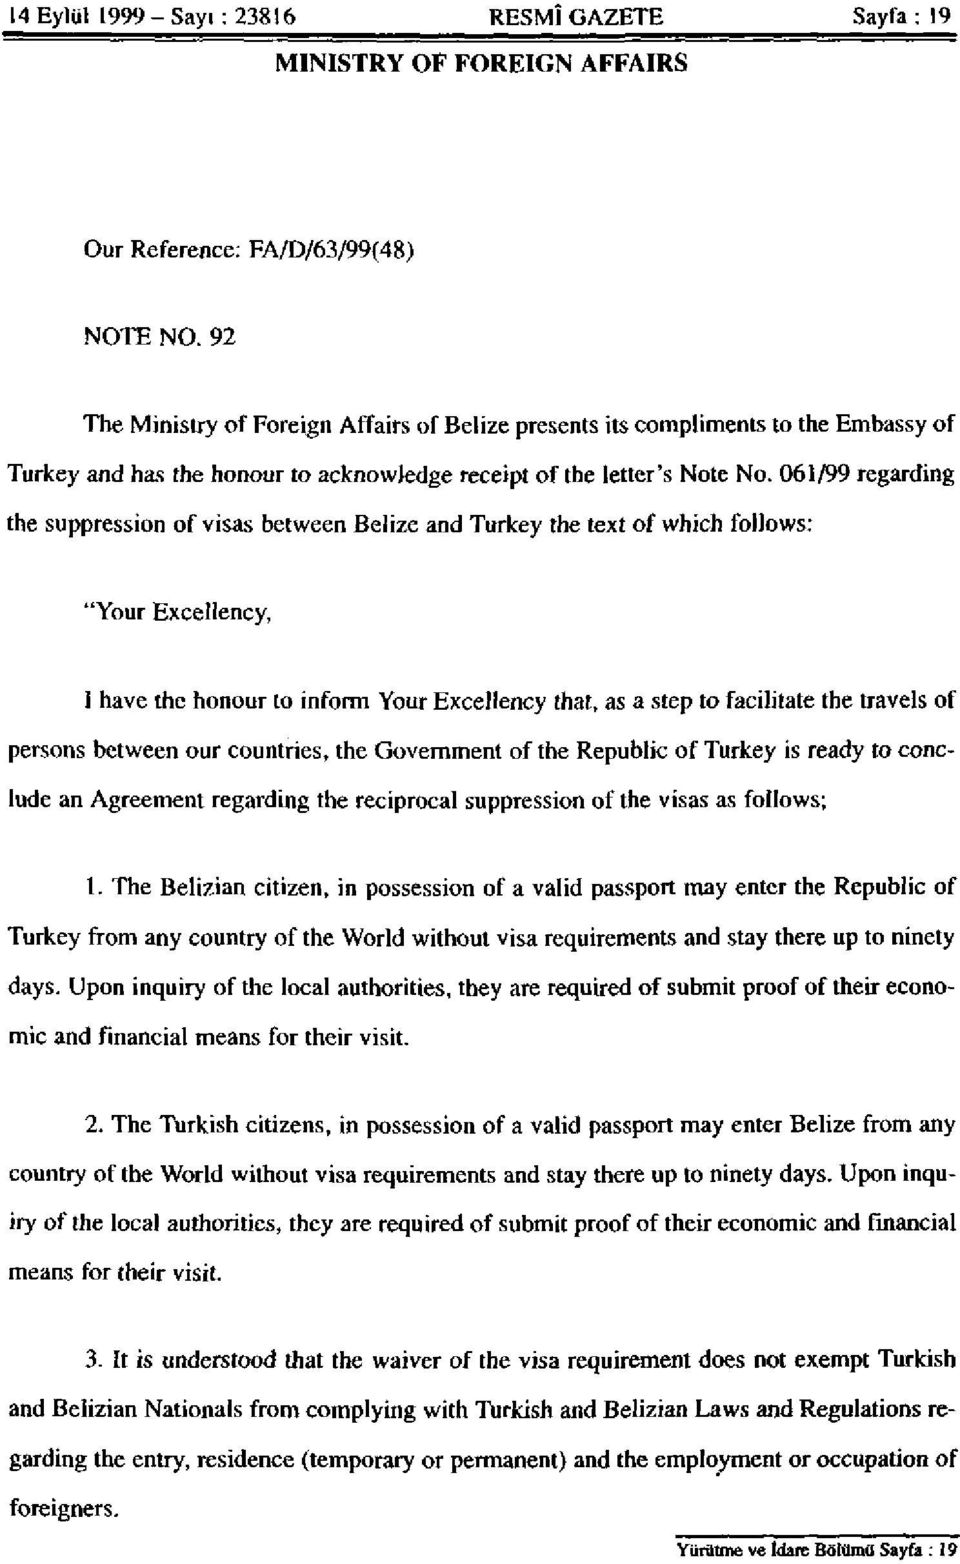 061/99 regarding the suppression of visas between Belize and Turkey the text of which follows: "Your Excellency, I have the honour to inform Your Excellency that, as a step to facilitate the travels